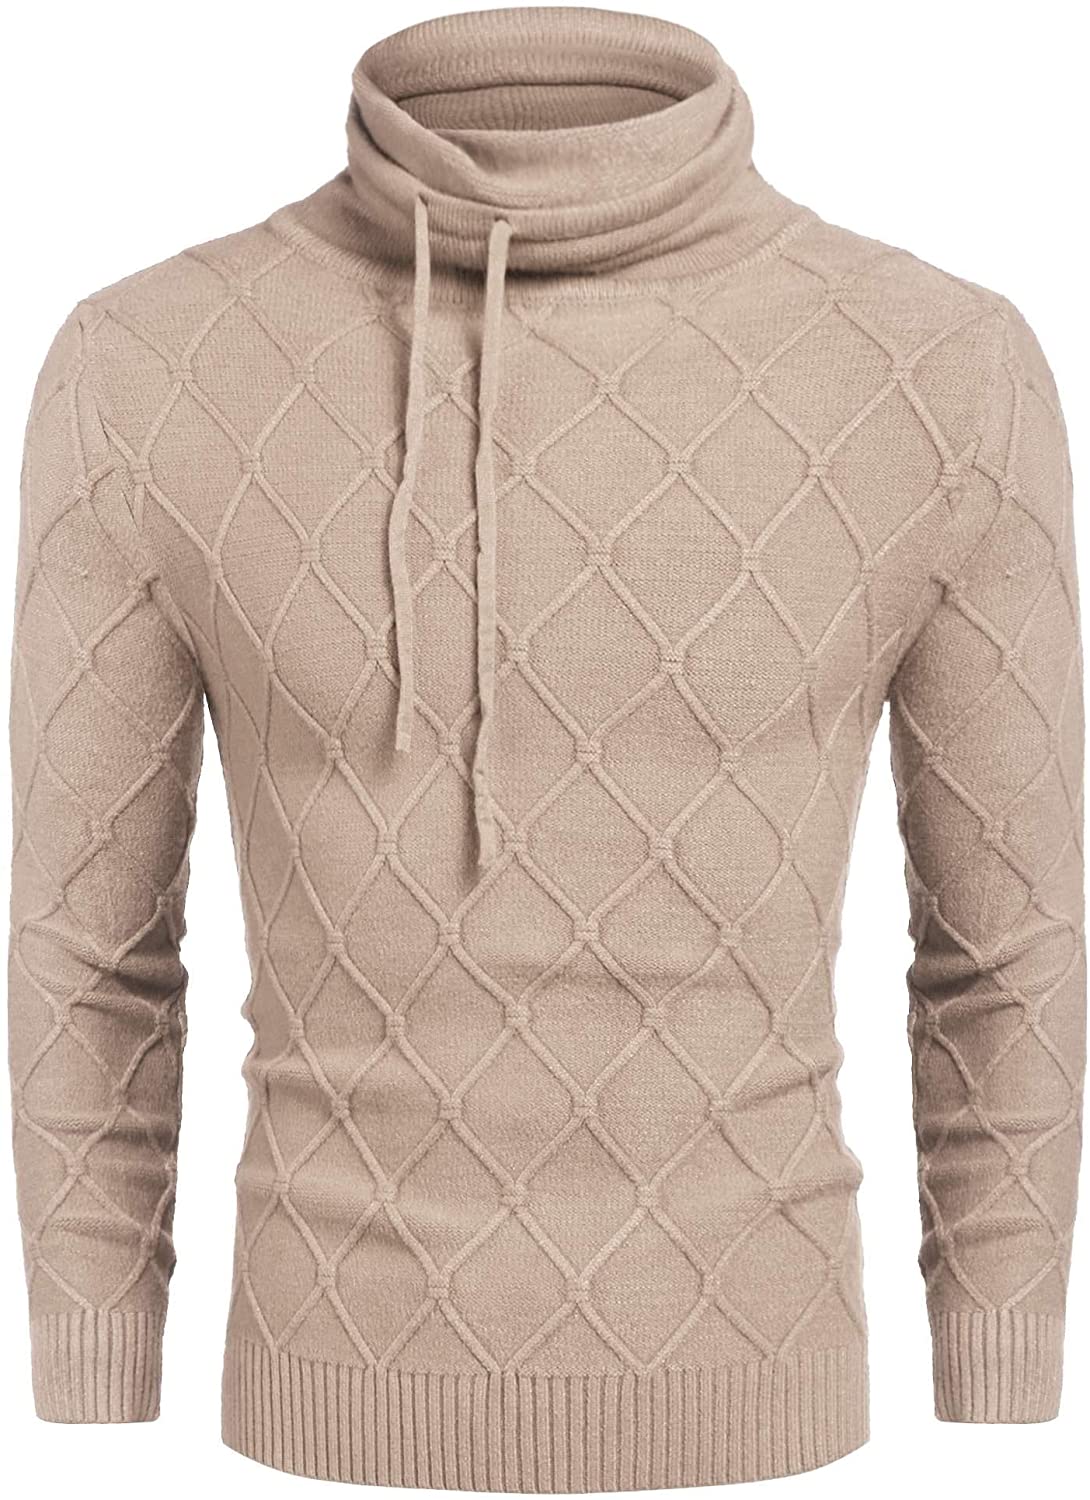 COOFANDY Men's Knitted Turtleneck Sweater Casual Thermal Long Sleeve Pullover